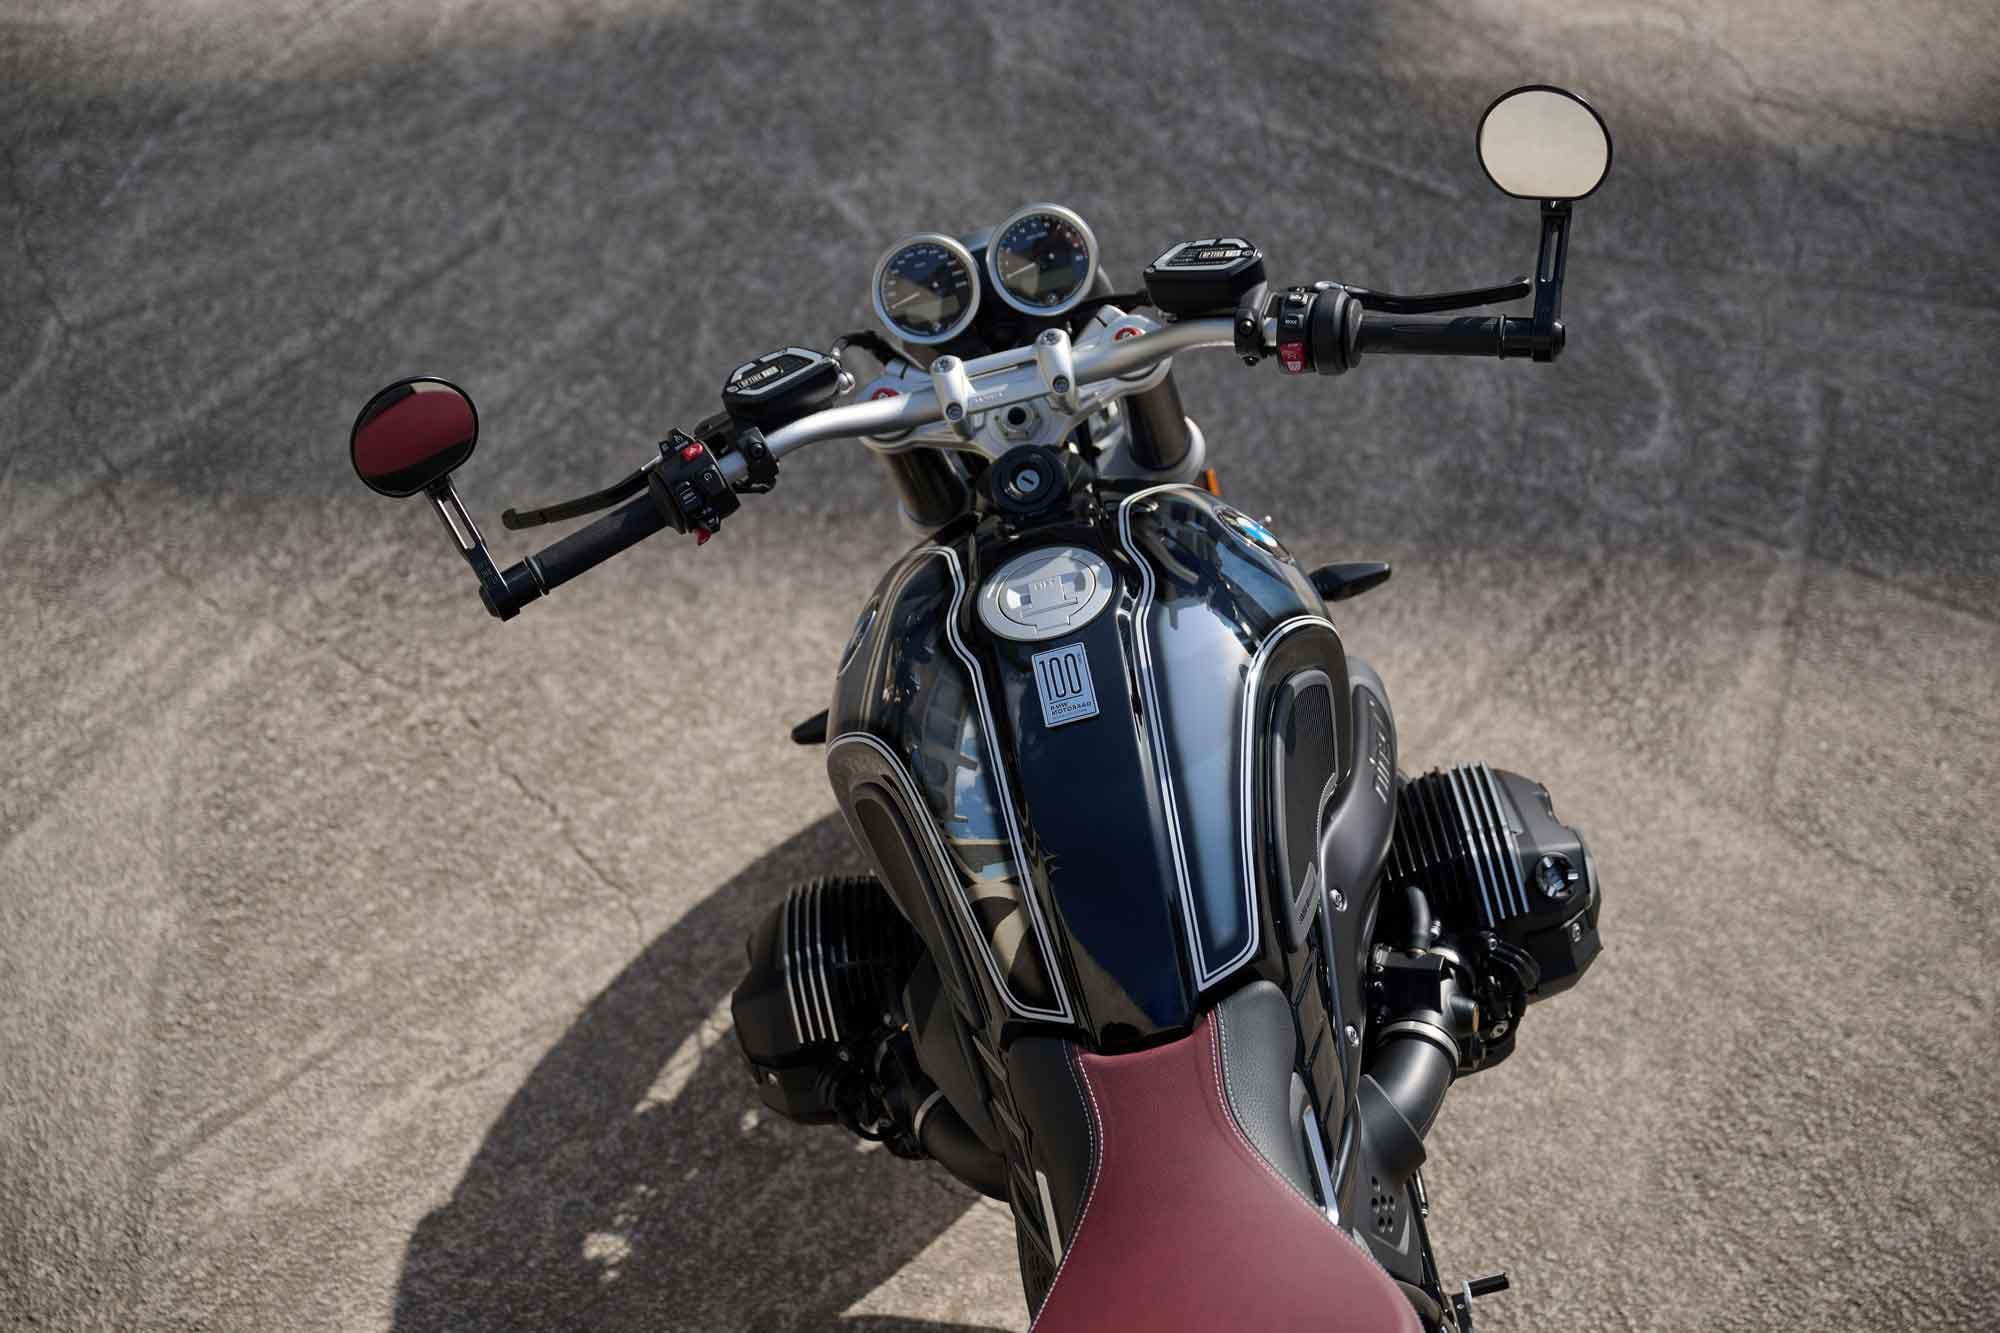 All aboard: the R nineT 100 Years cockpit.